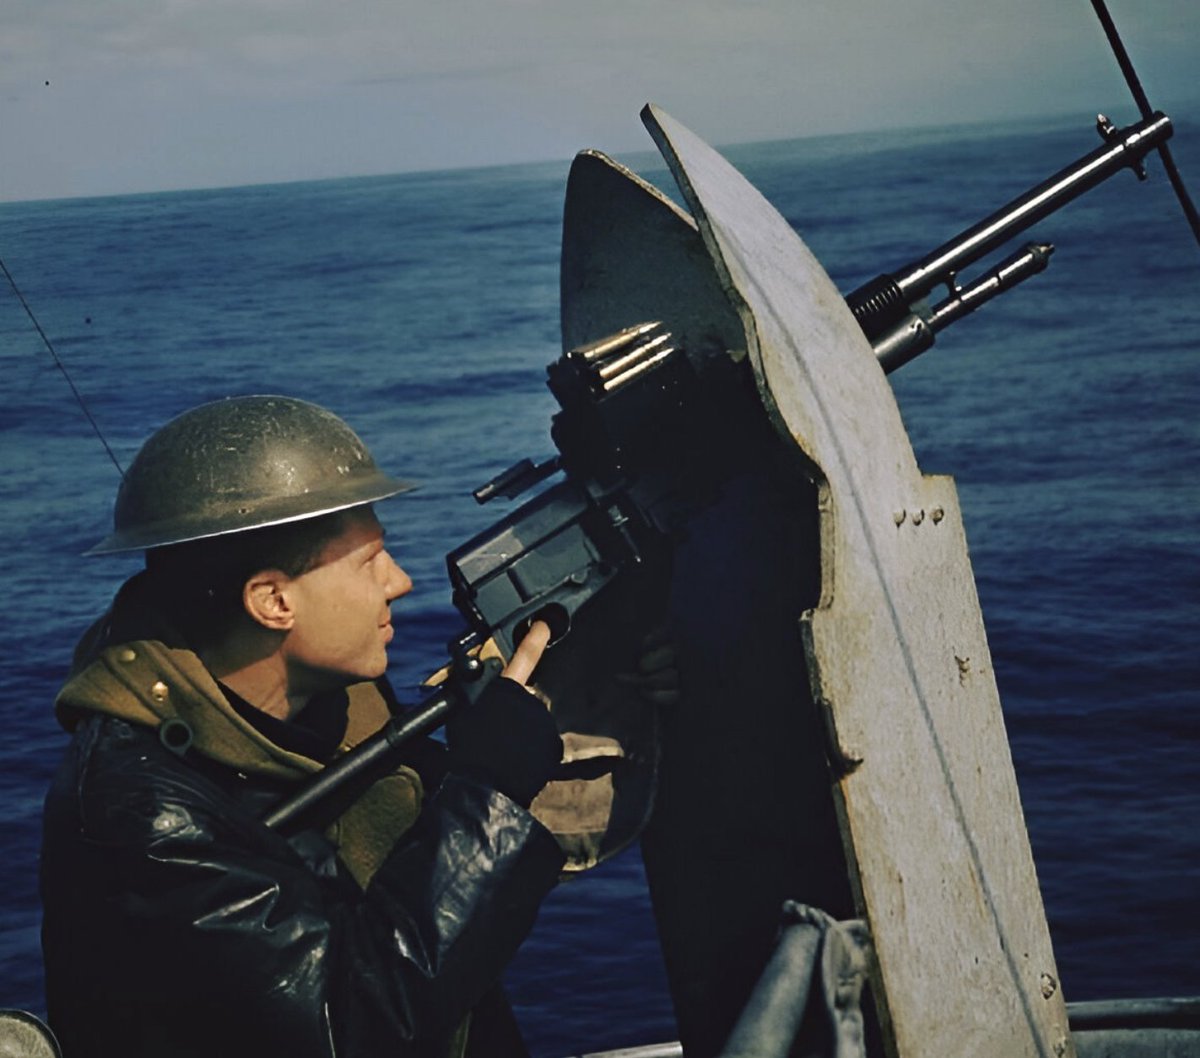 A machine gunner on an escort vessel keeps constant watch as the Royal Navy guards a British convoy across the Atlantic. The weapon is a Hotchkiss M1909 Benét-Mercié machine gun.⚓ S️ource: SSAFA, the Armed Forces charity